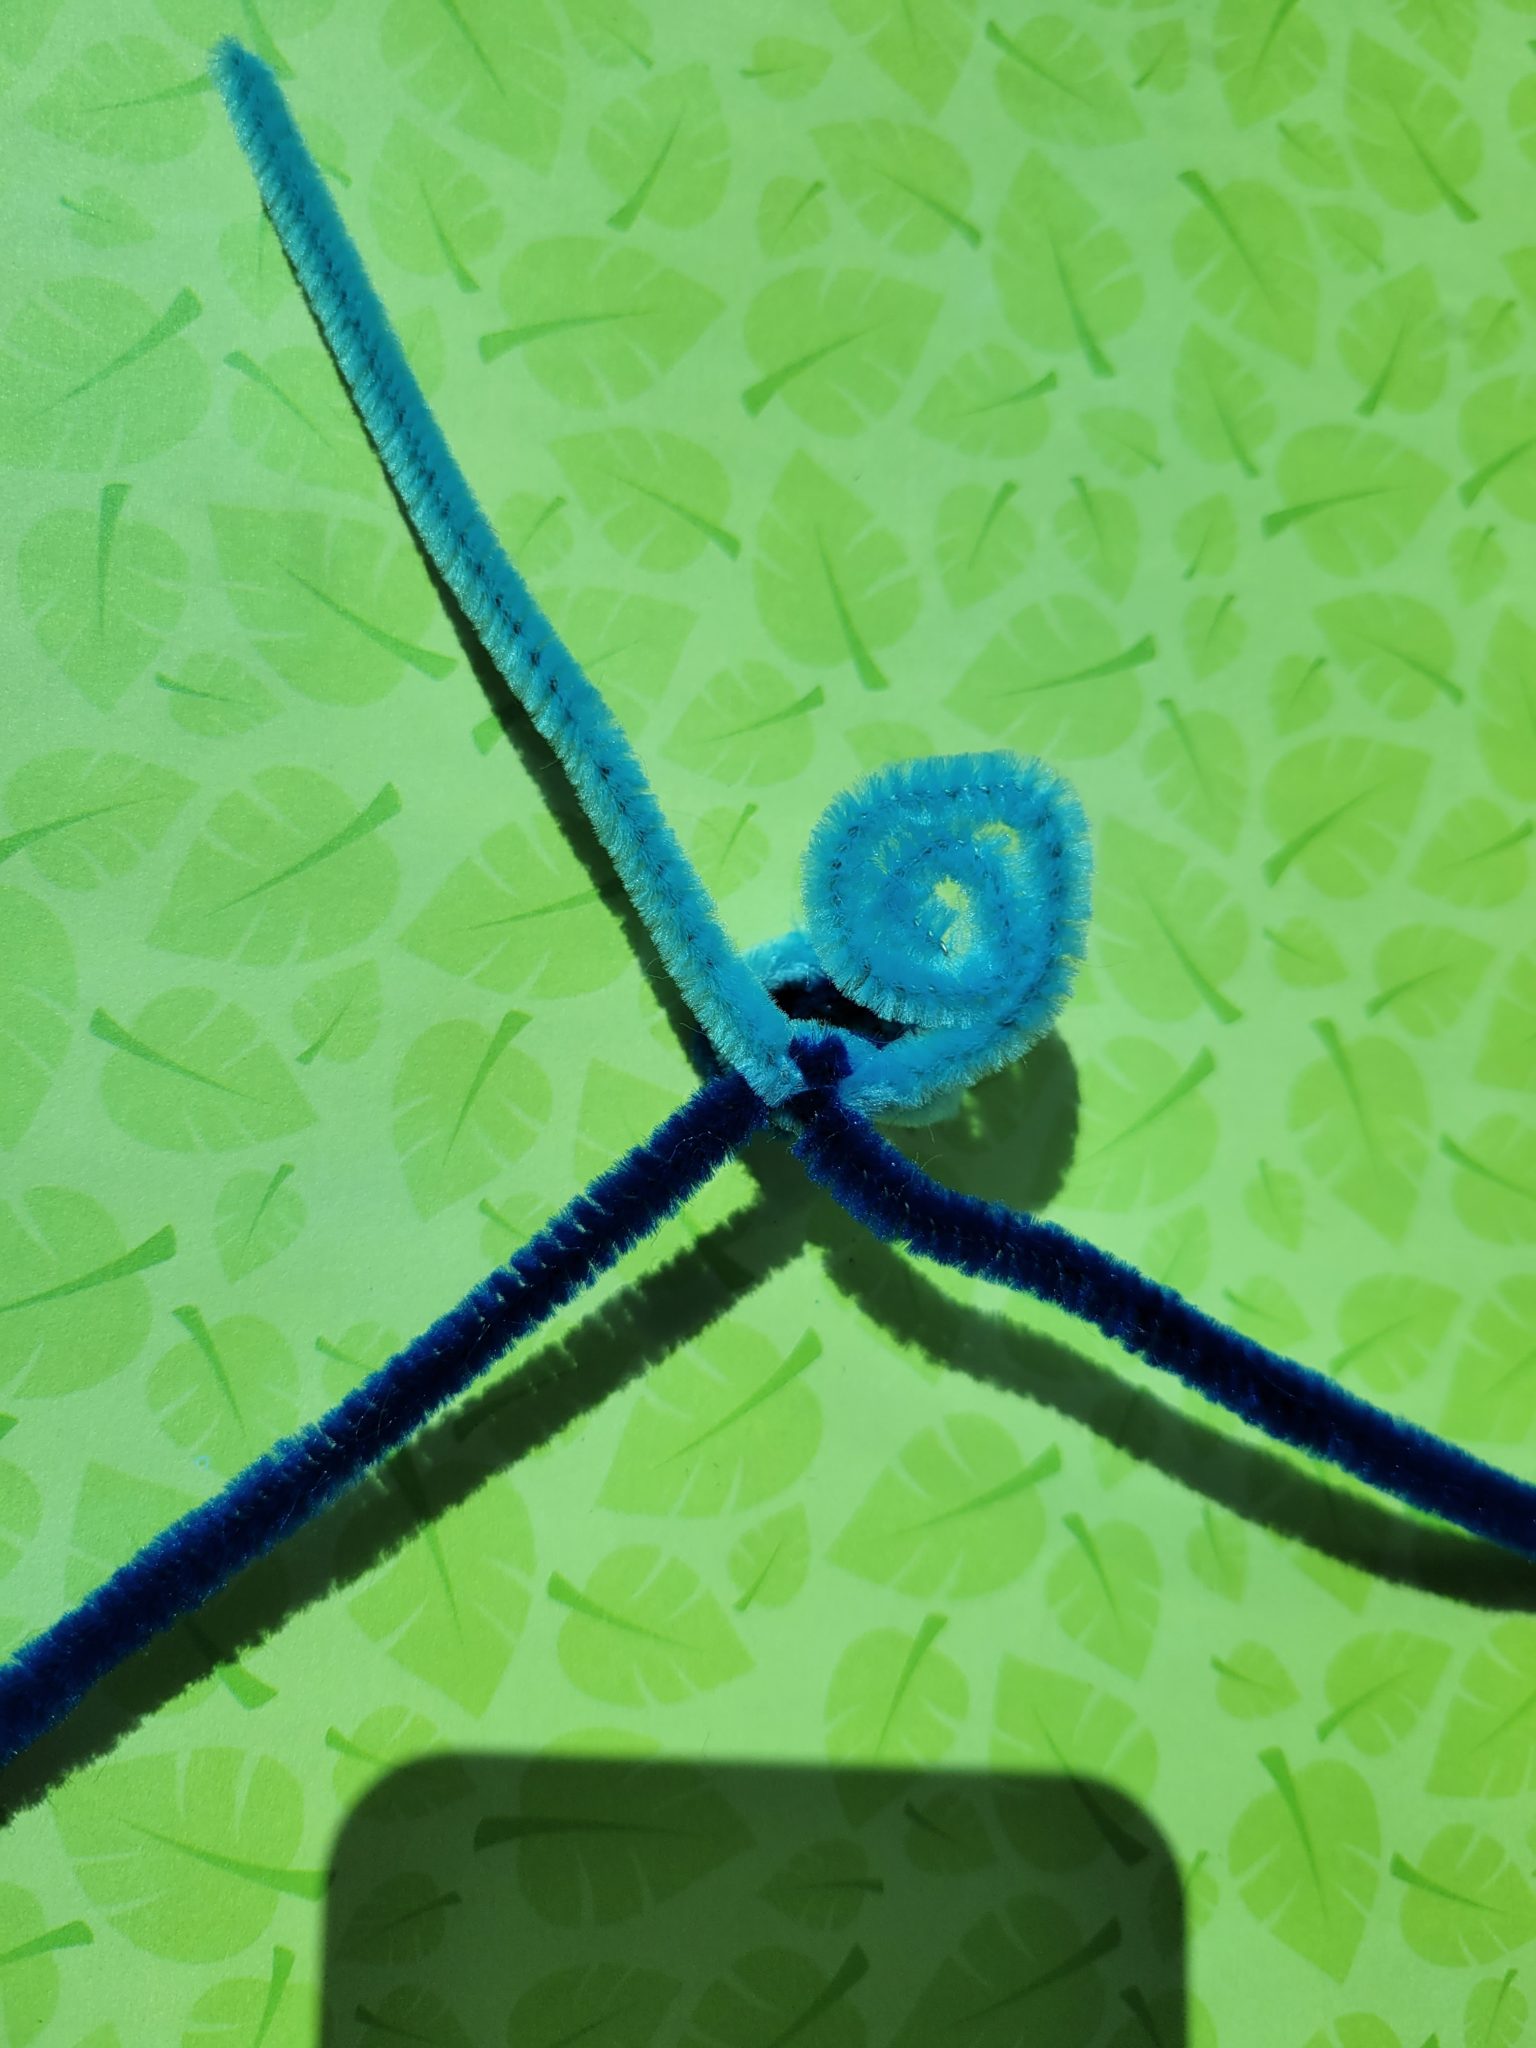 curled chenille stems